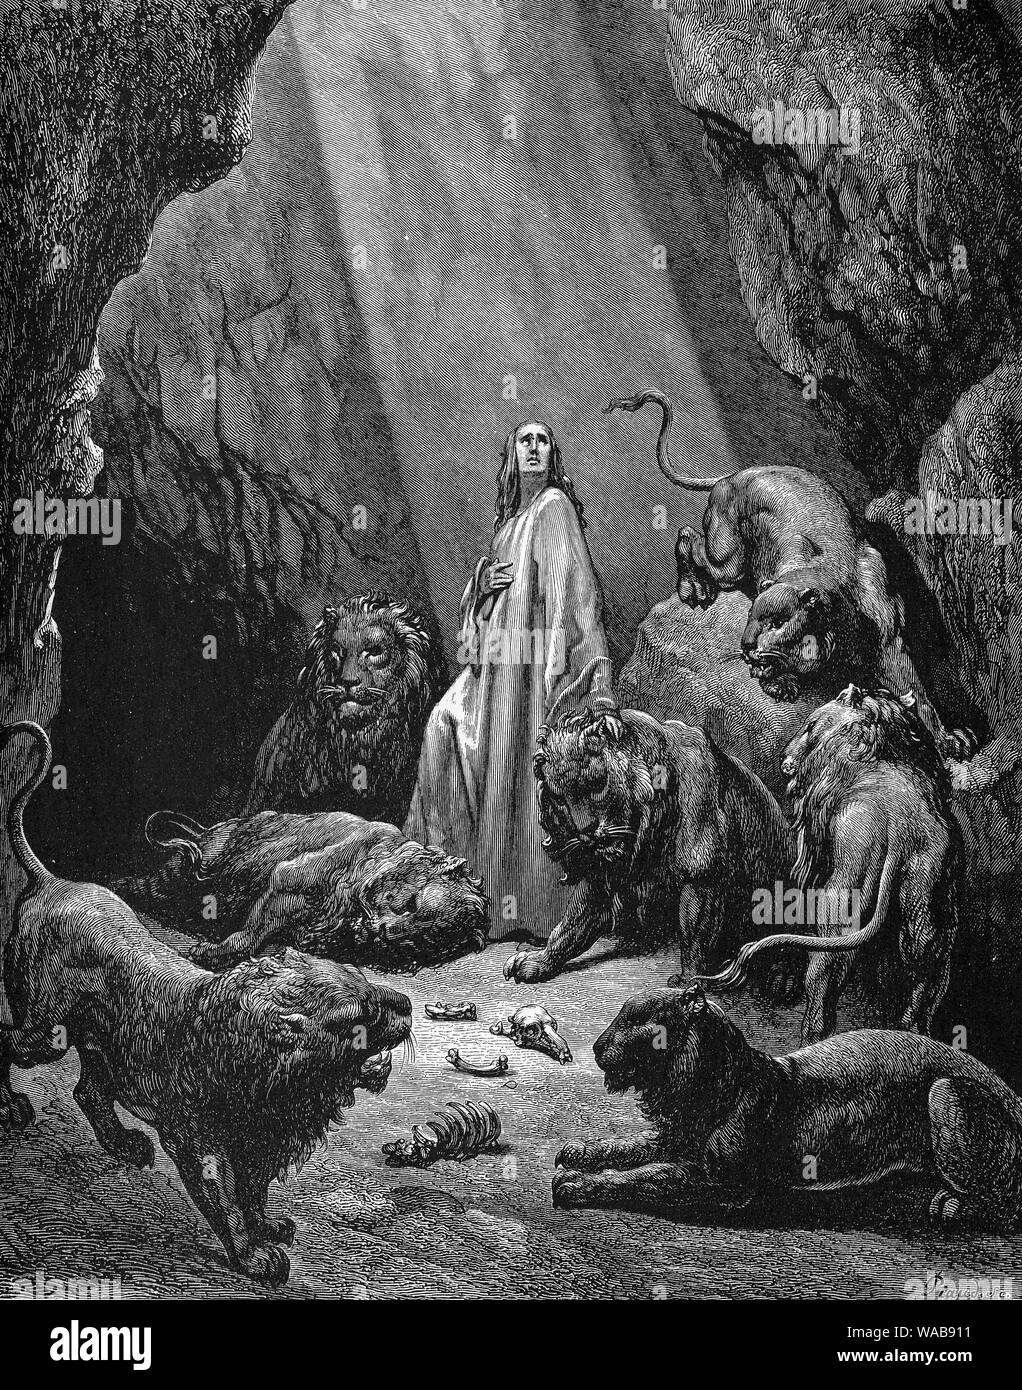 Gustave Doré, Daniel in the Lions' Den, engraving, 1866 Stock Photo